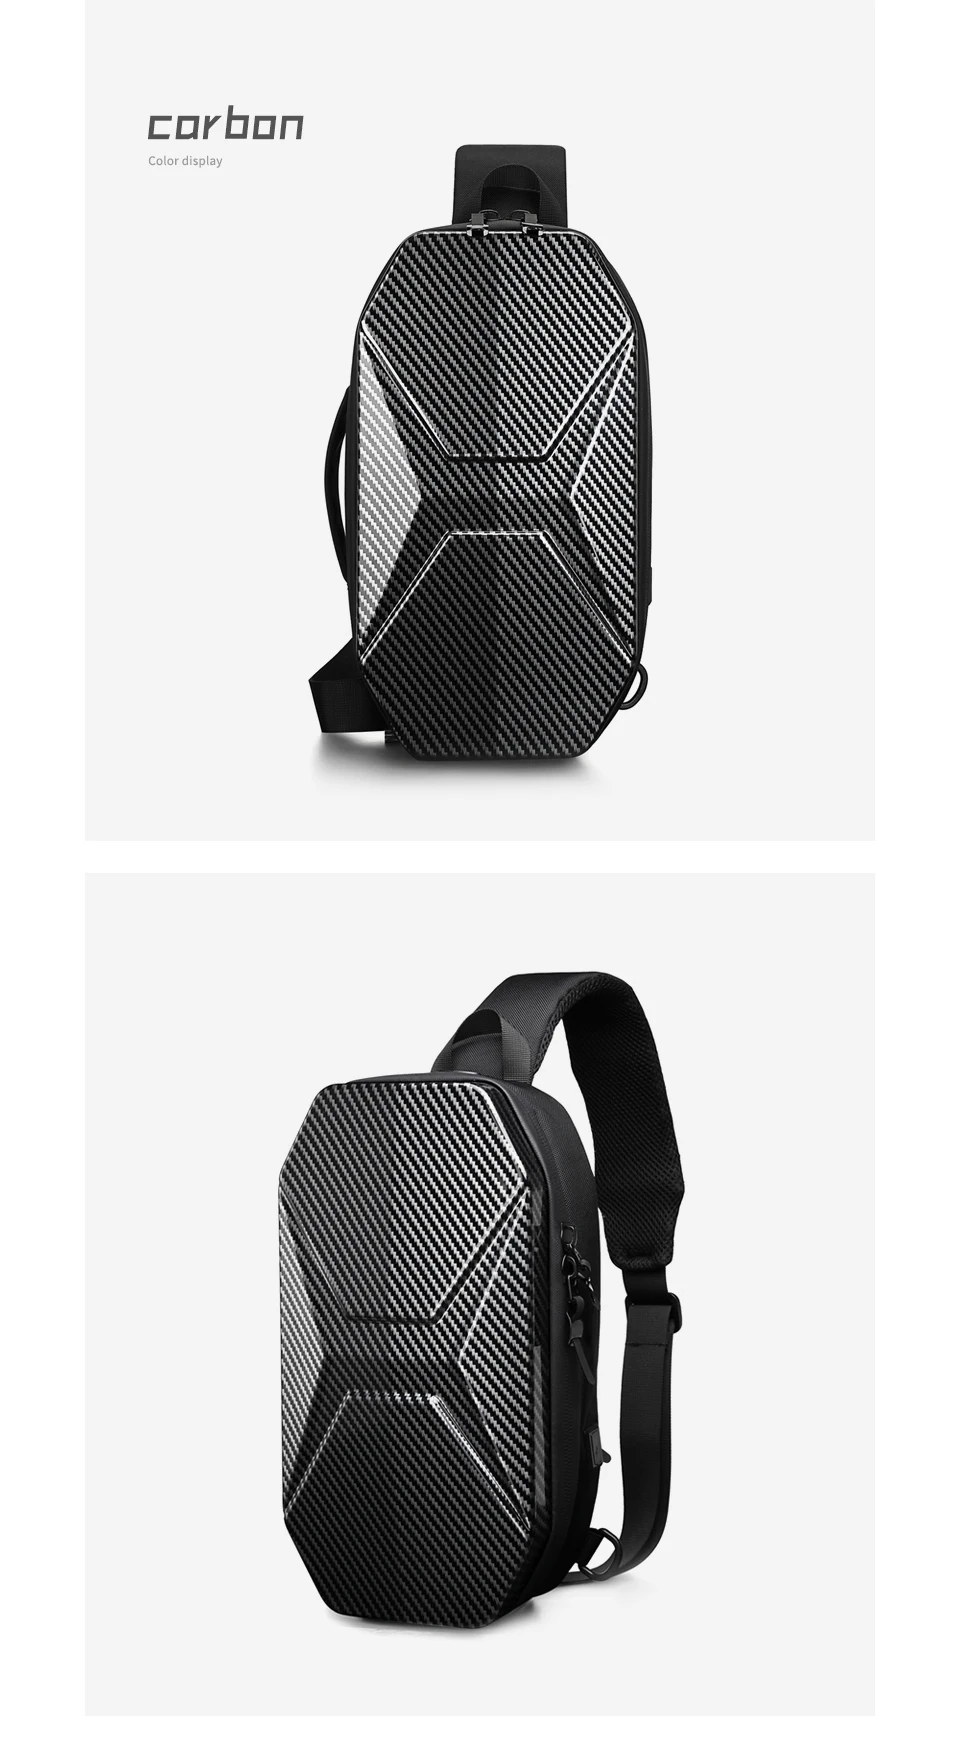 Neouo Carbon Fiber Cool Hard Case Sling Bags with USB Charging Port Various Viewing Angles